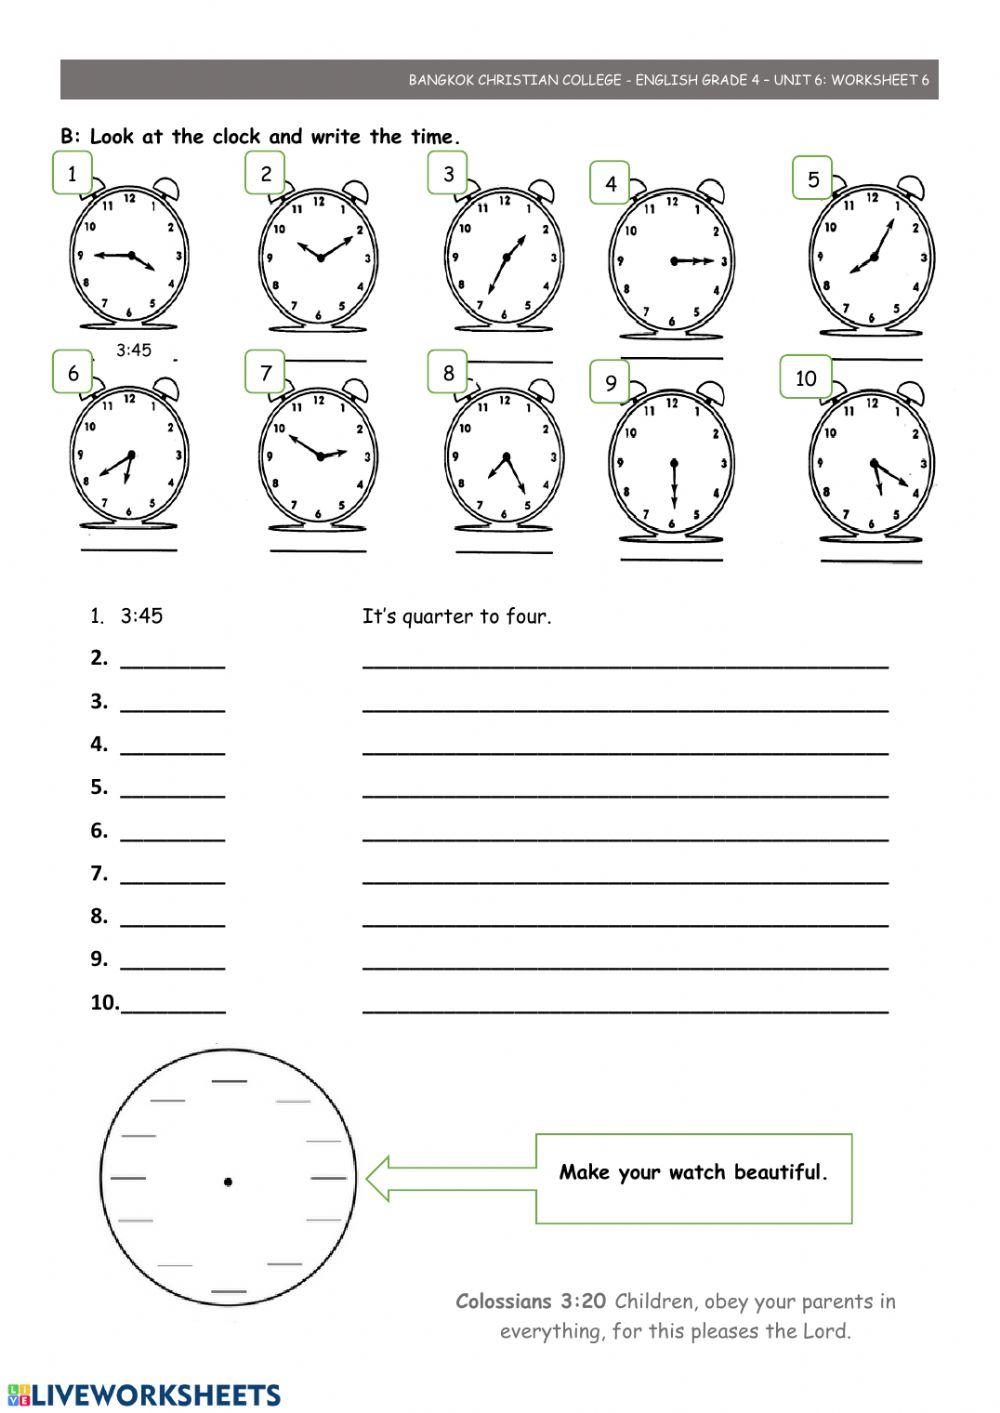 Telling time ws 6